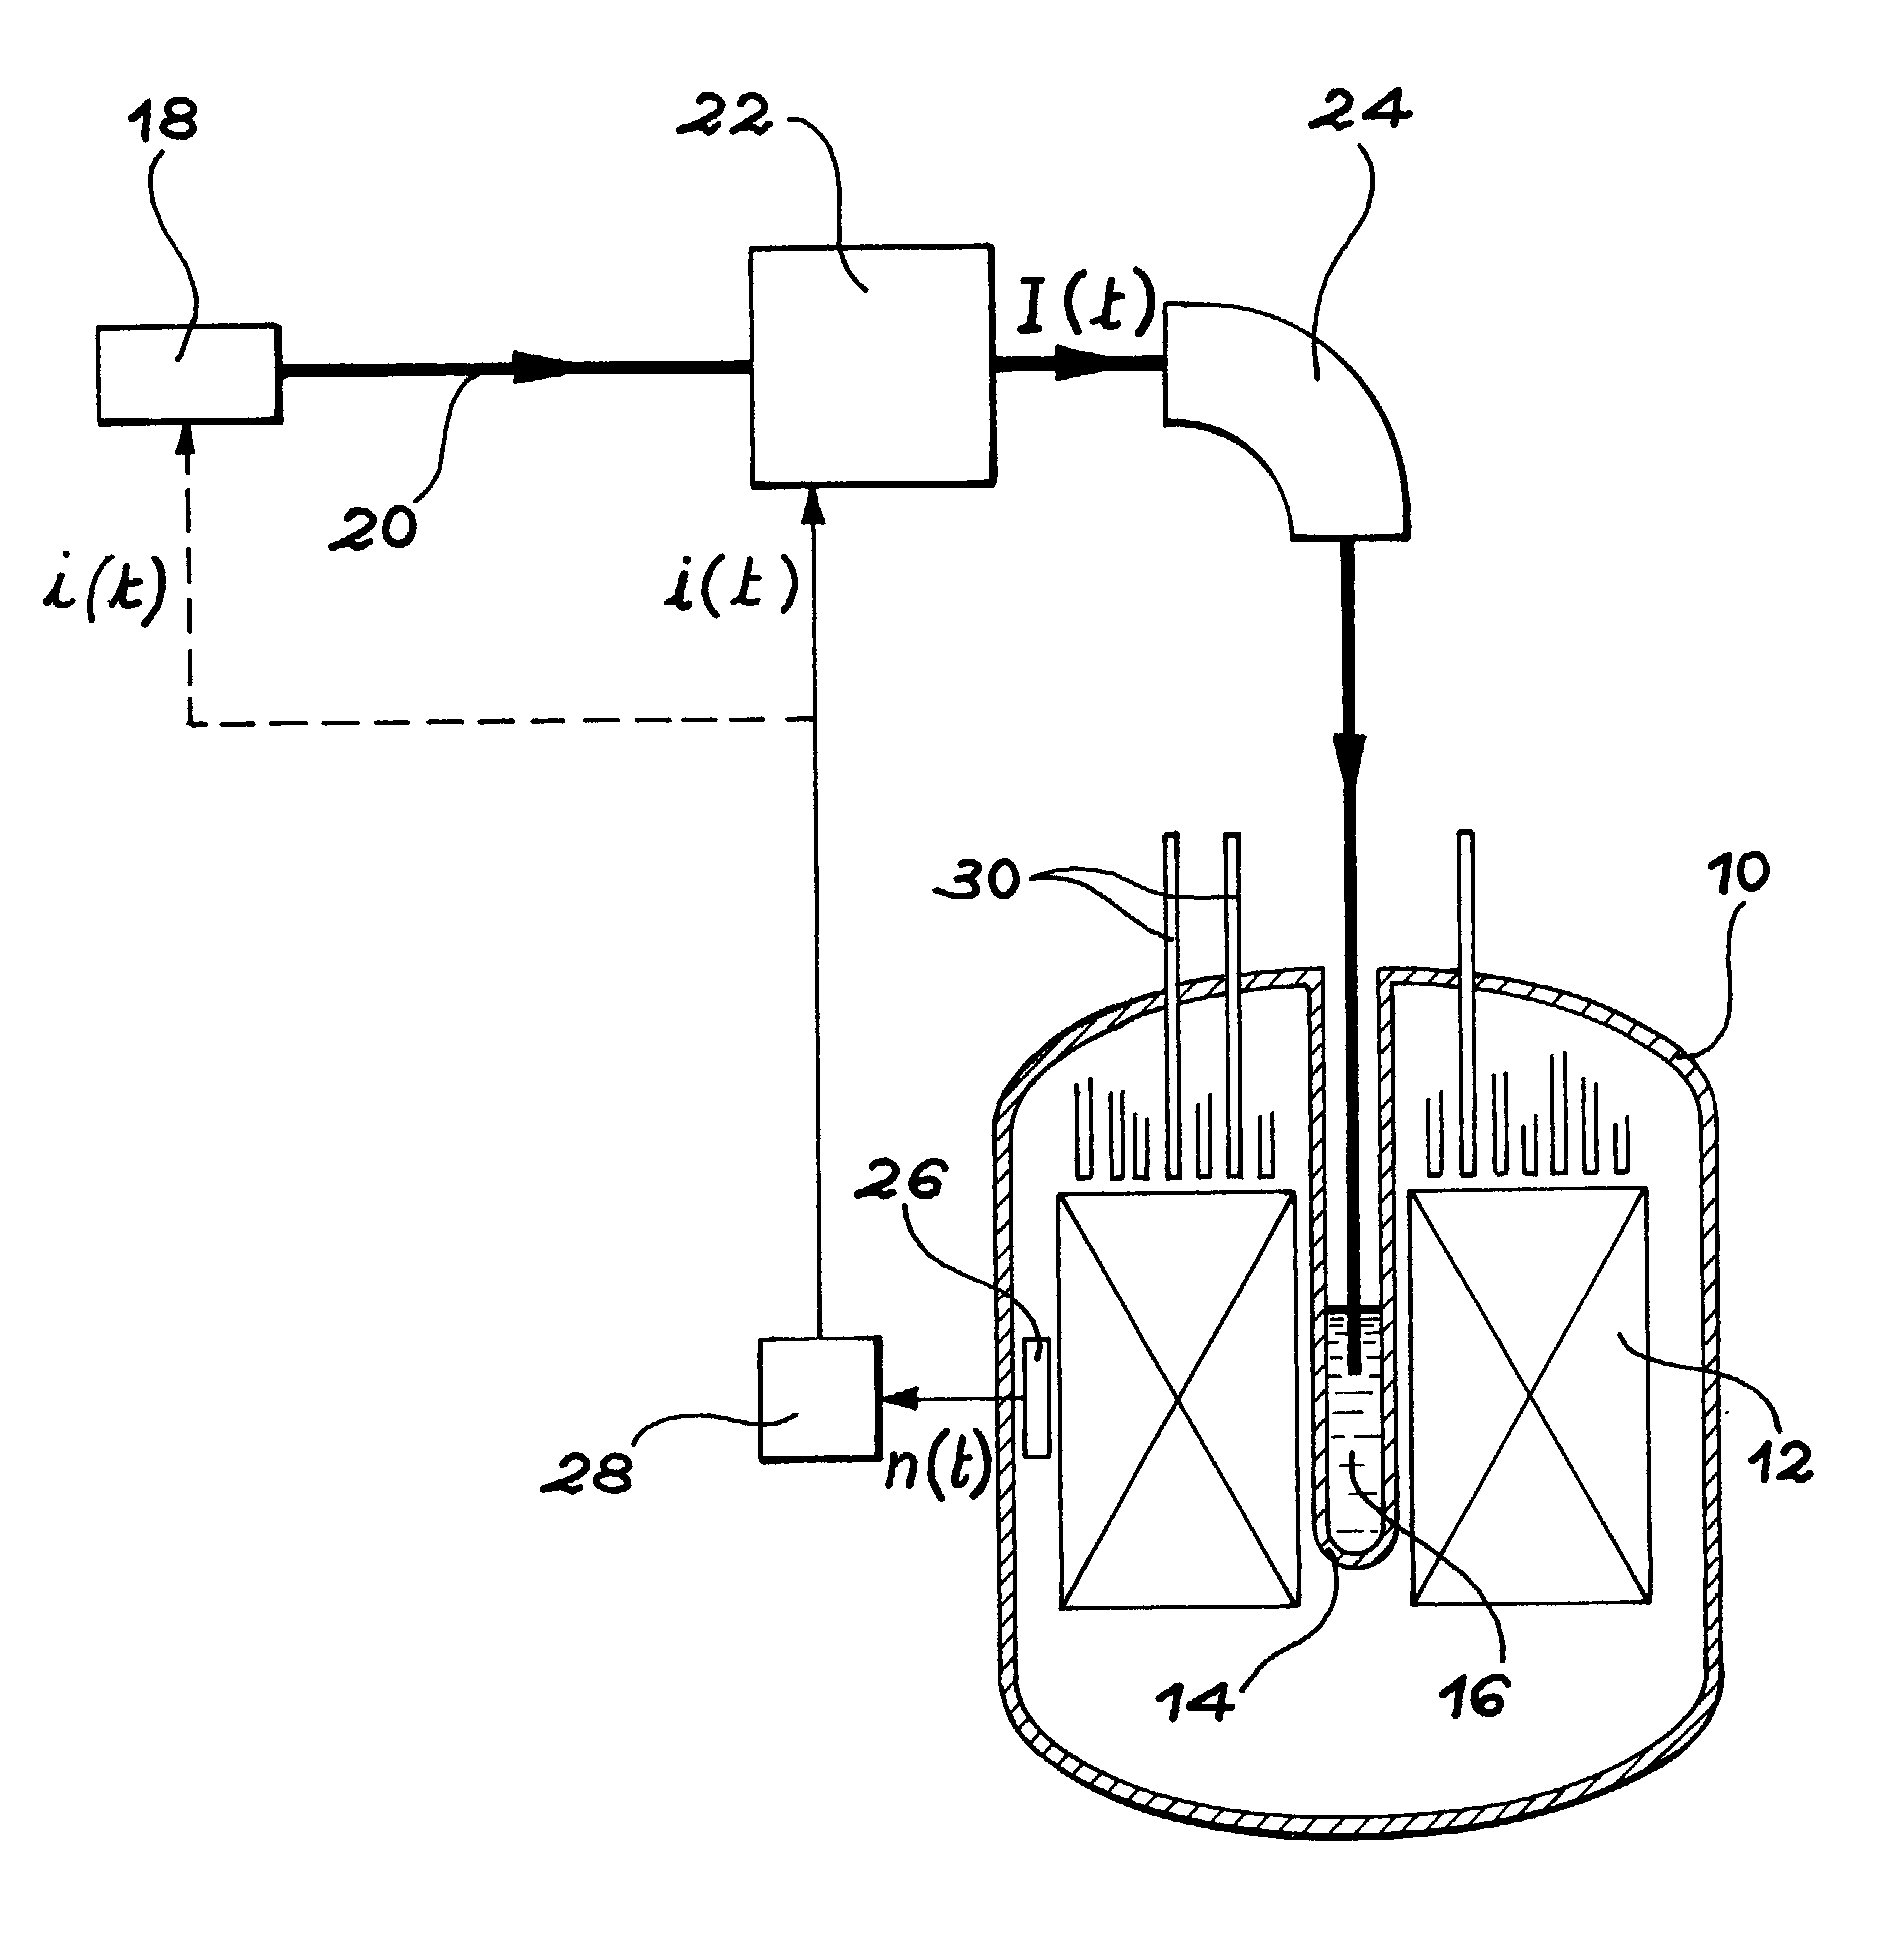 Method for incinerating transuranian chemical elements and nuclear reactor using same